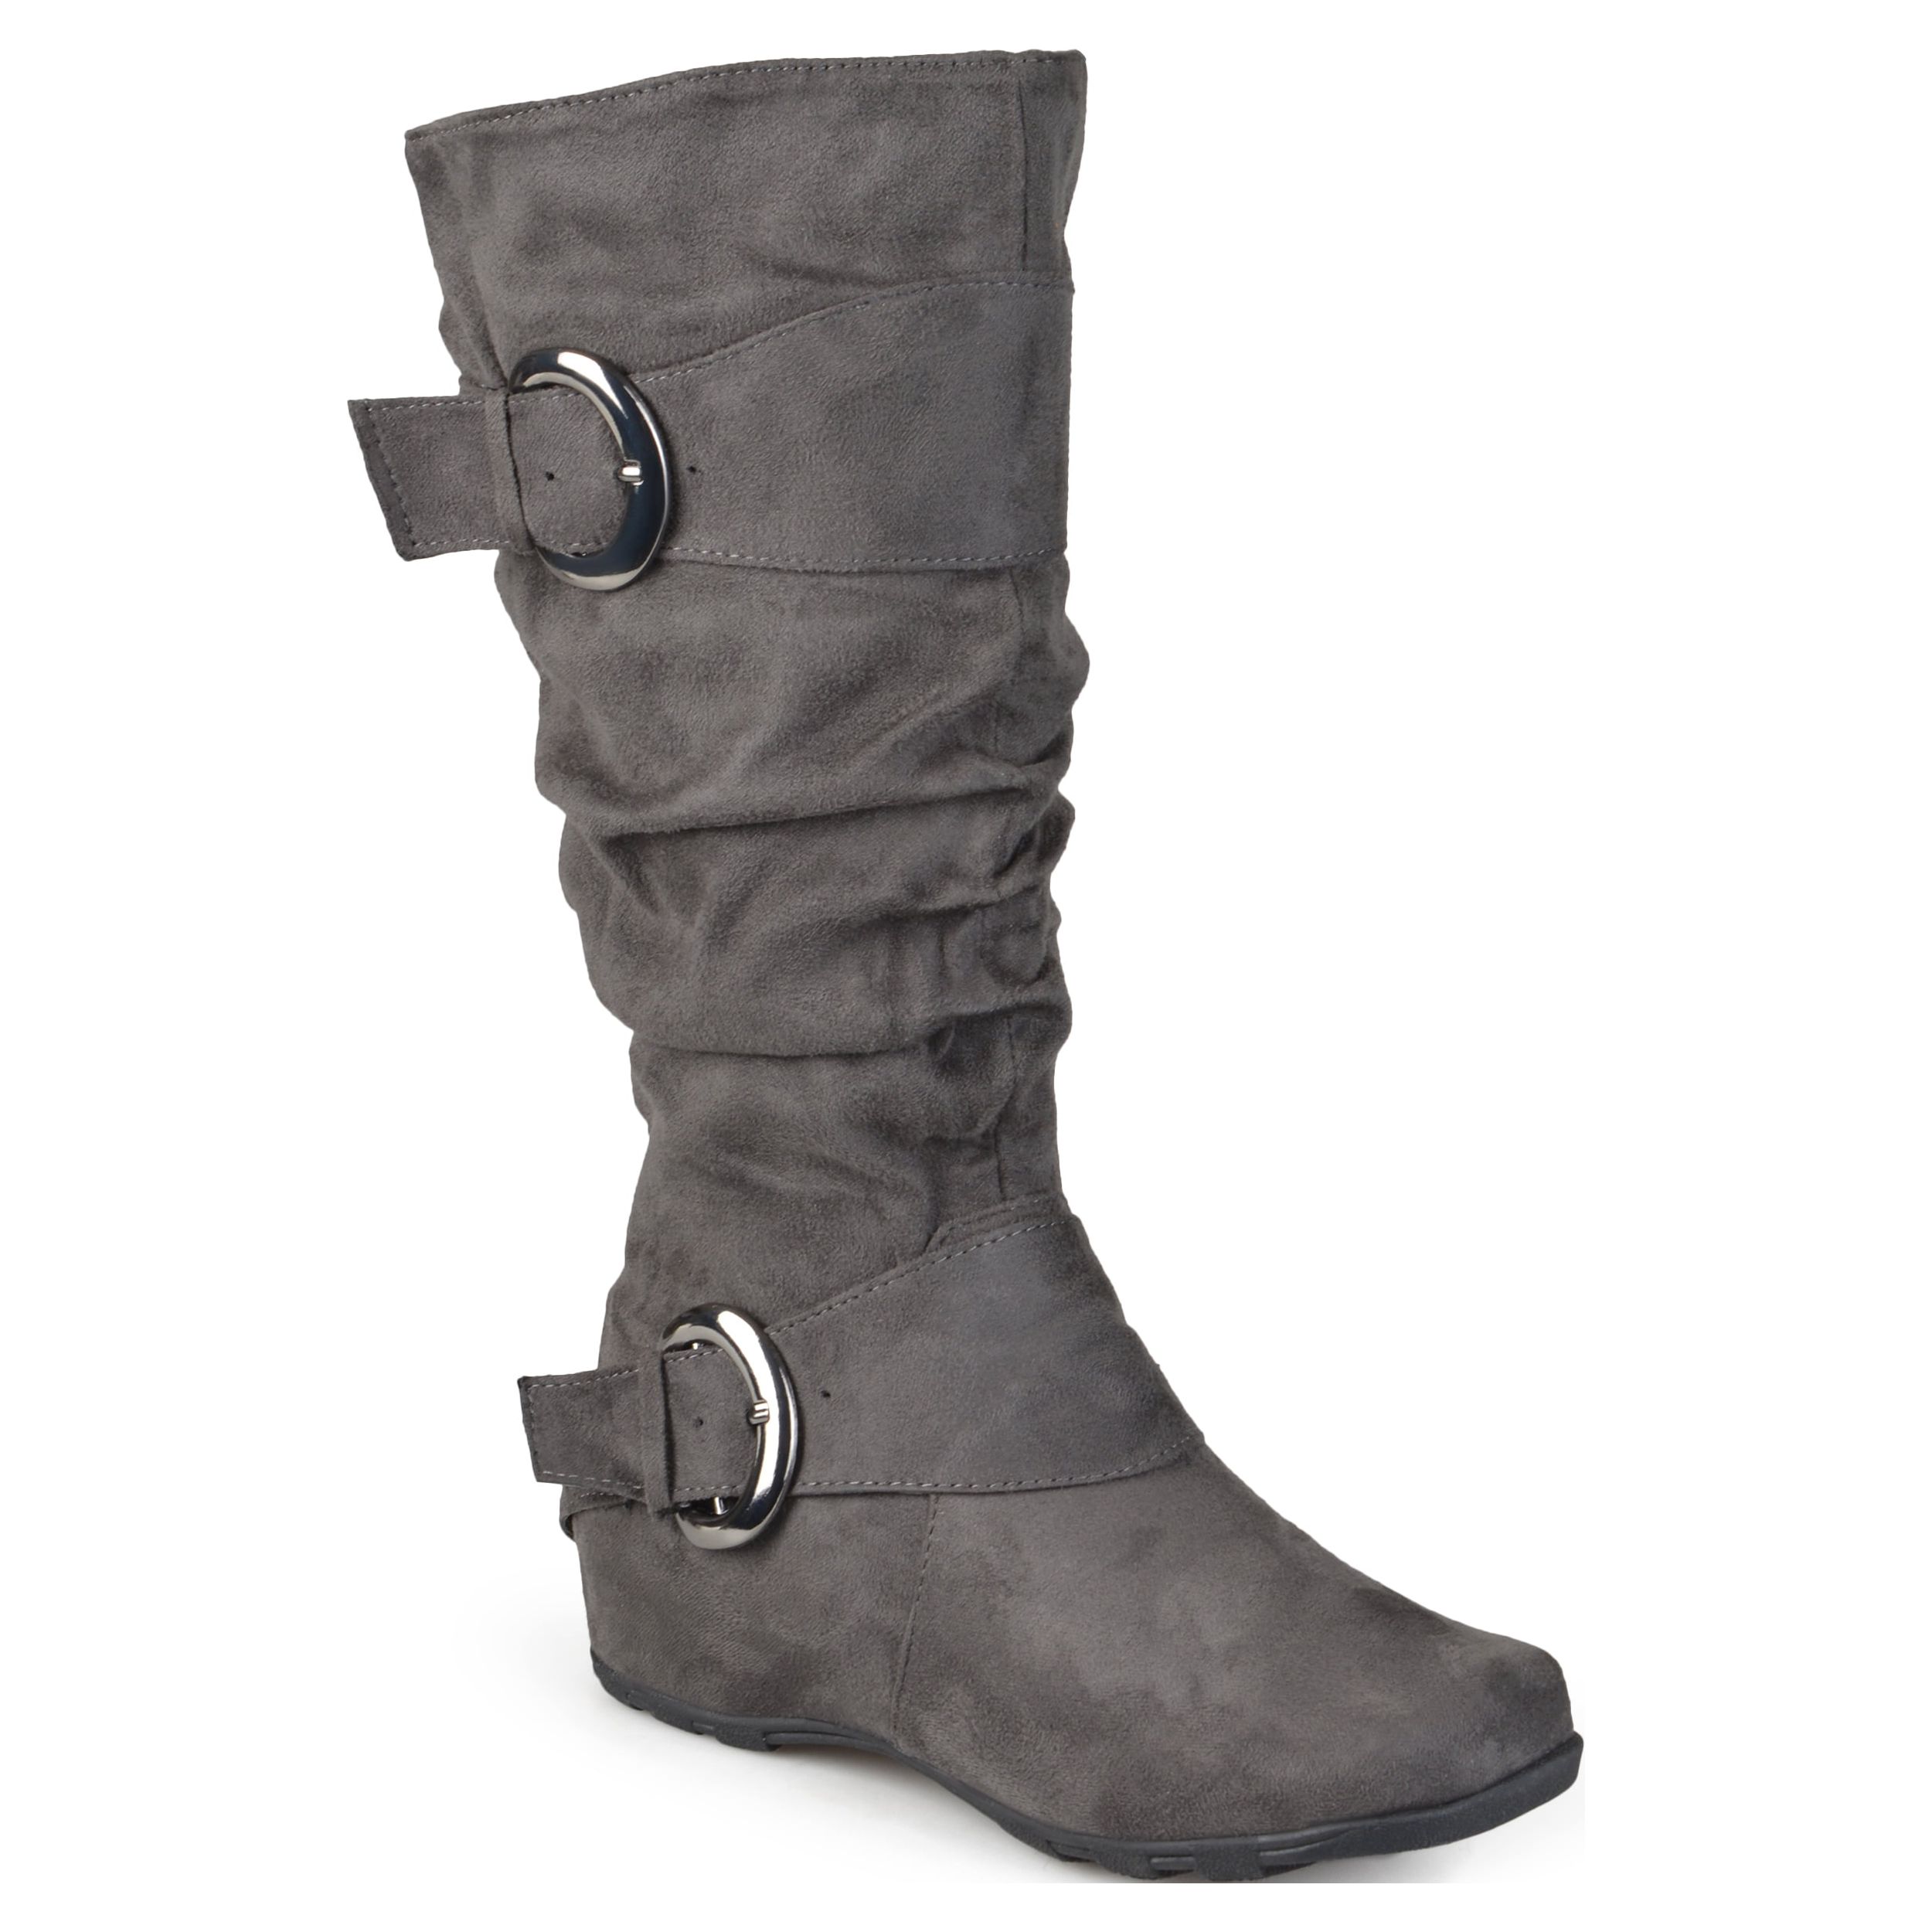 Women's Slouchy Wide Calf Boots - image 1 of 8